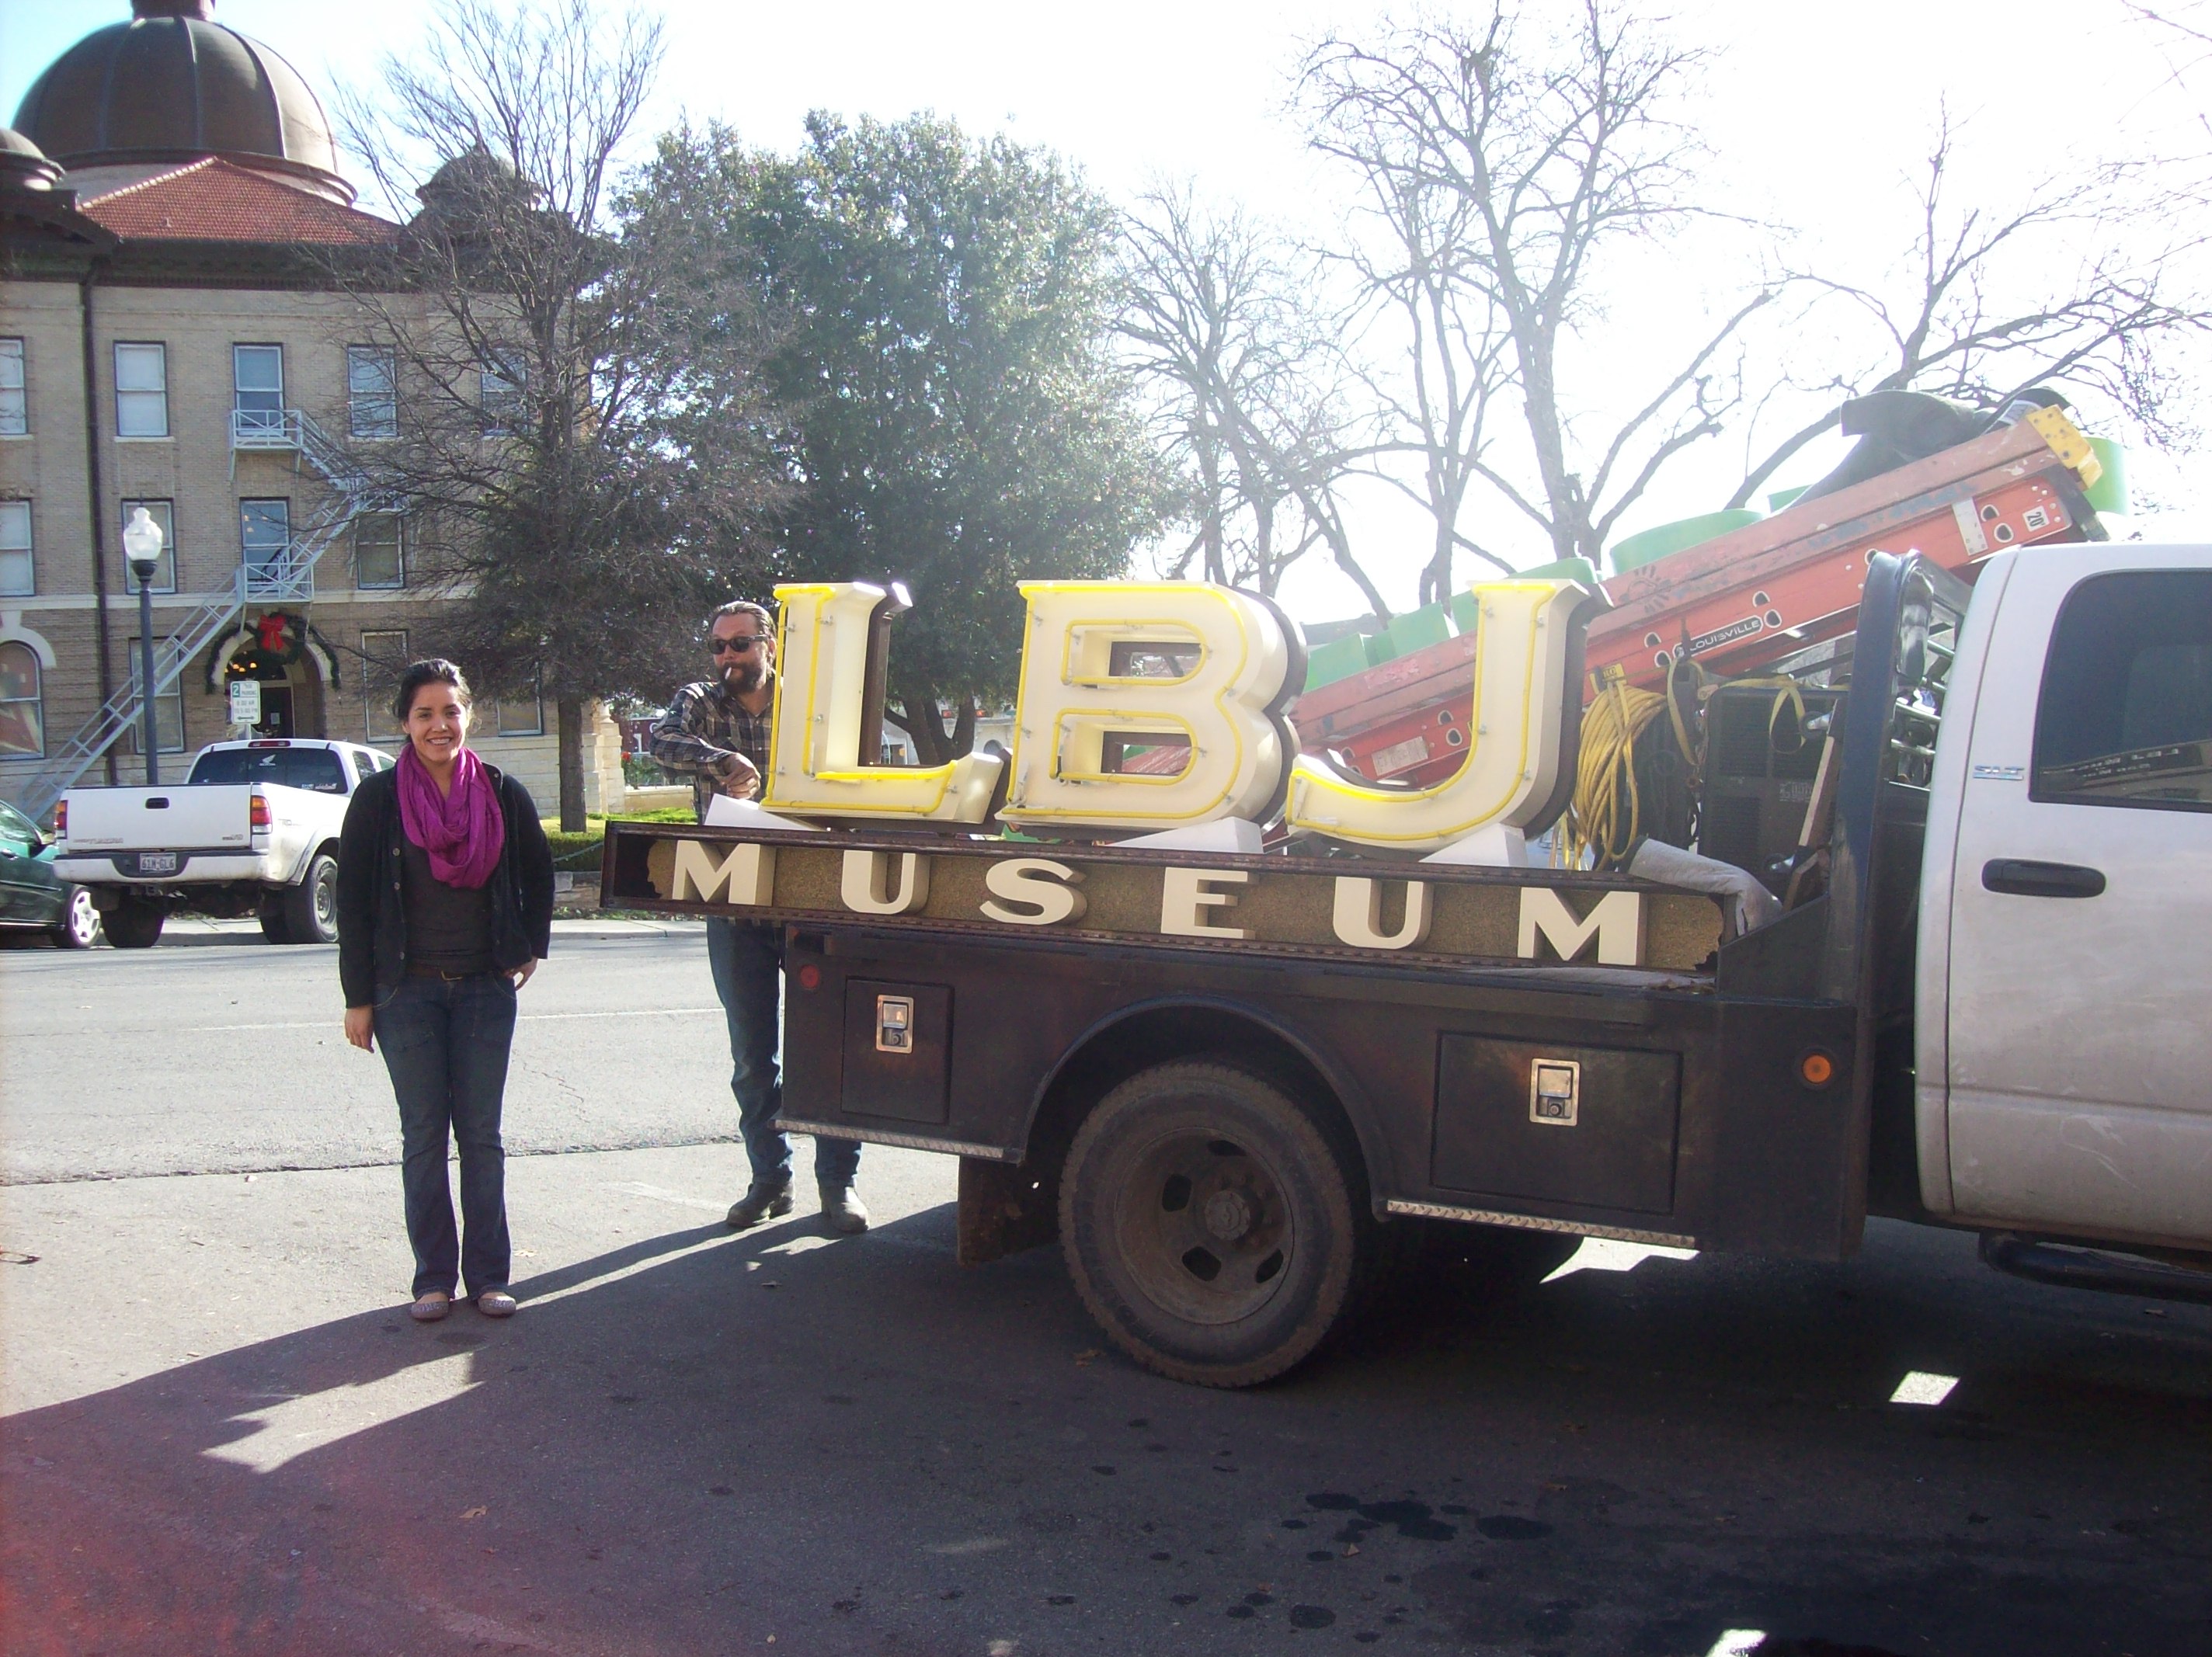 LBJ Museum sign is taken off of a delivery truck.